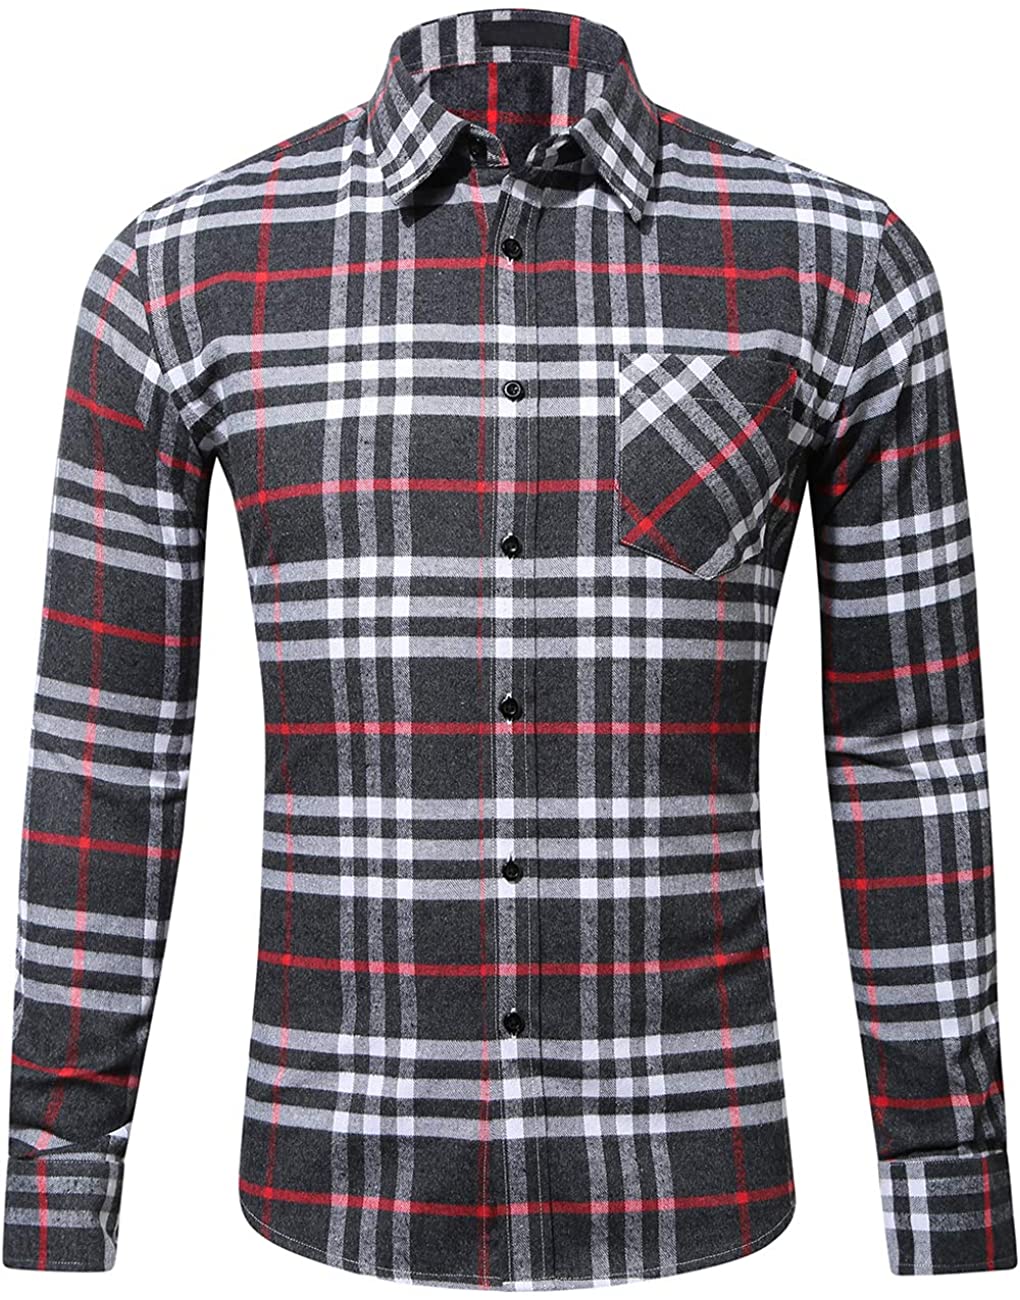 DOKKIA Men's Dress Buffalo Plaid Checkered Fitted Long Sleeve Flannel ...